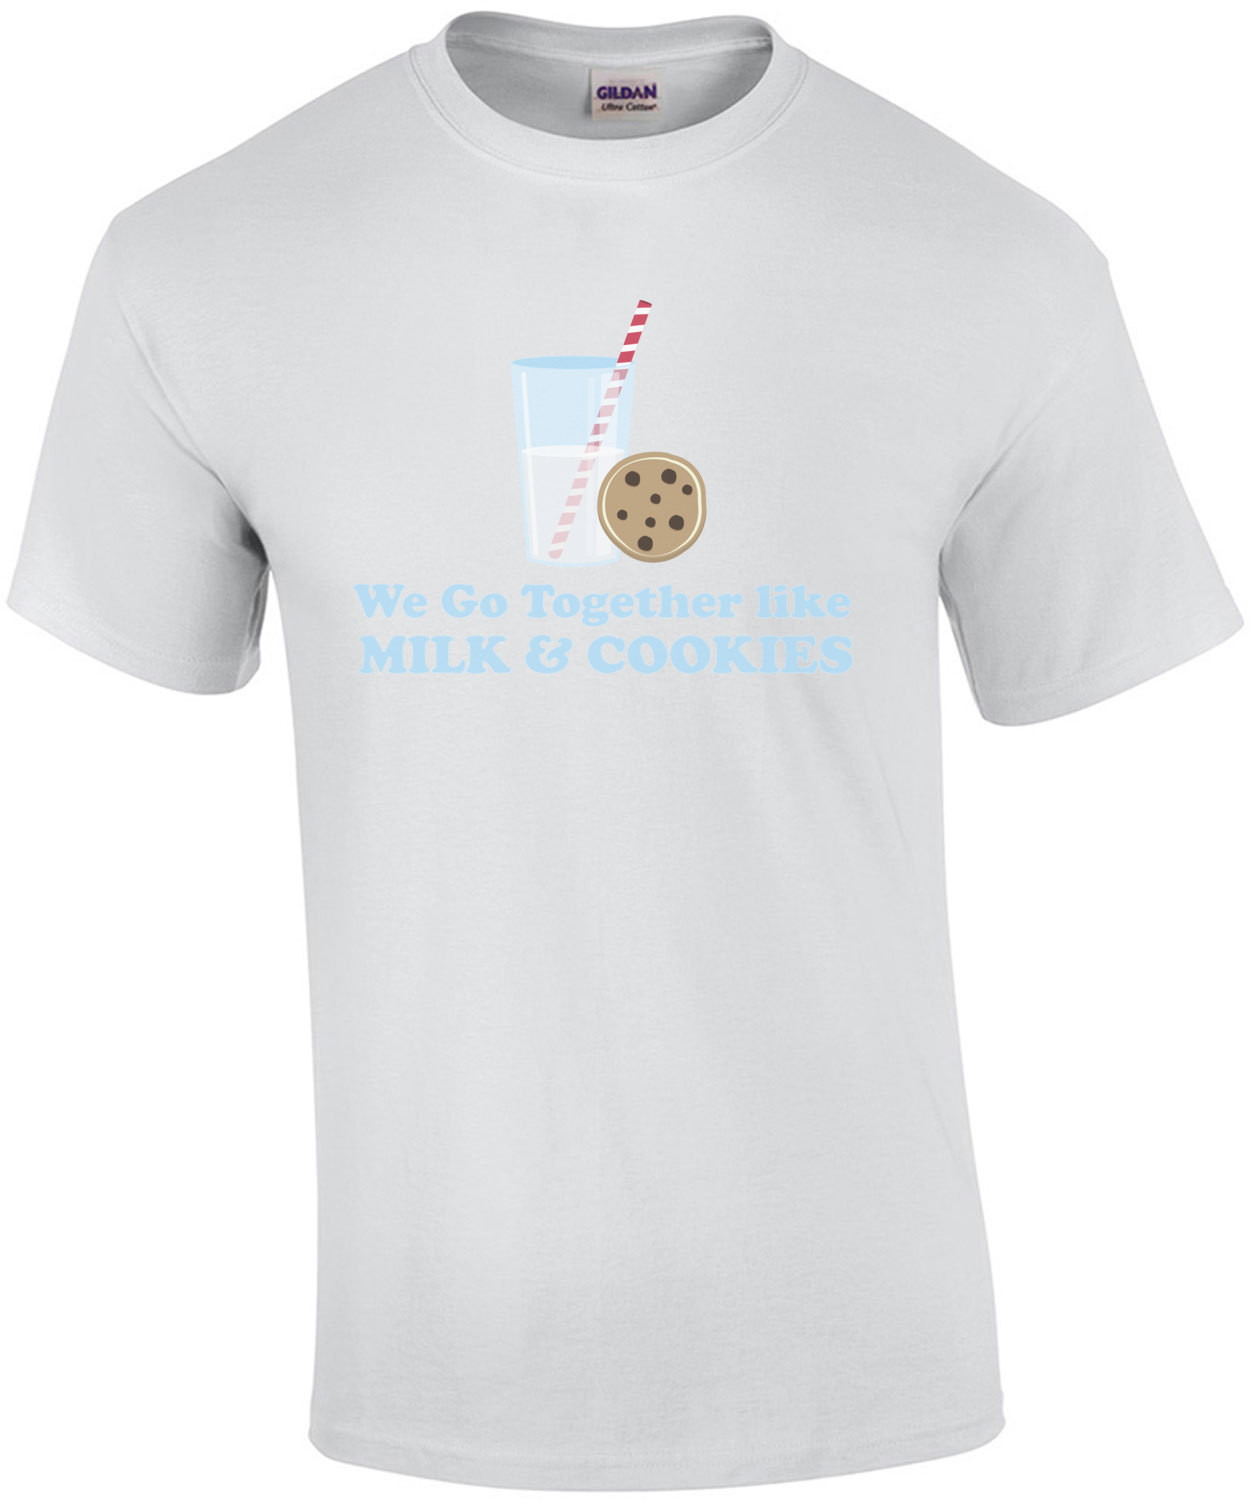 We go together like milk and cookies t-shirt